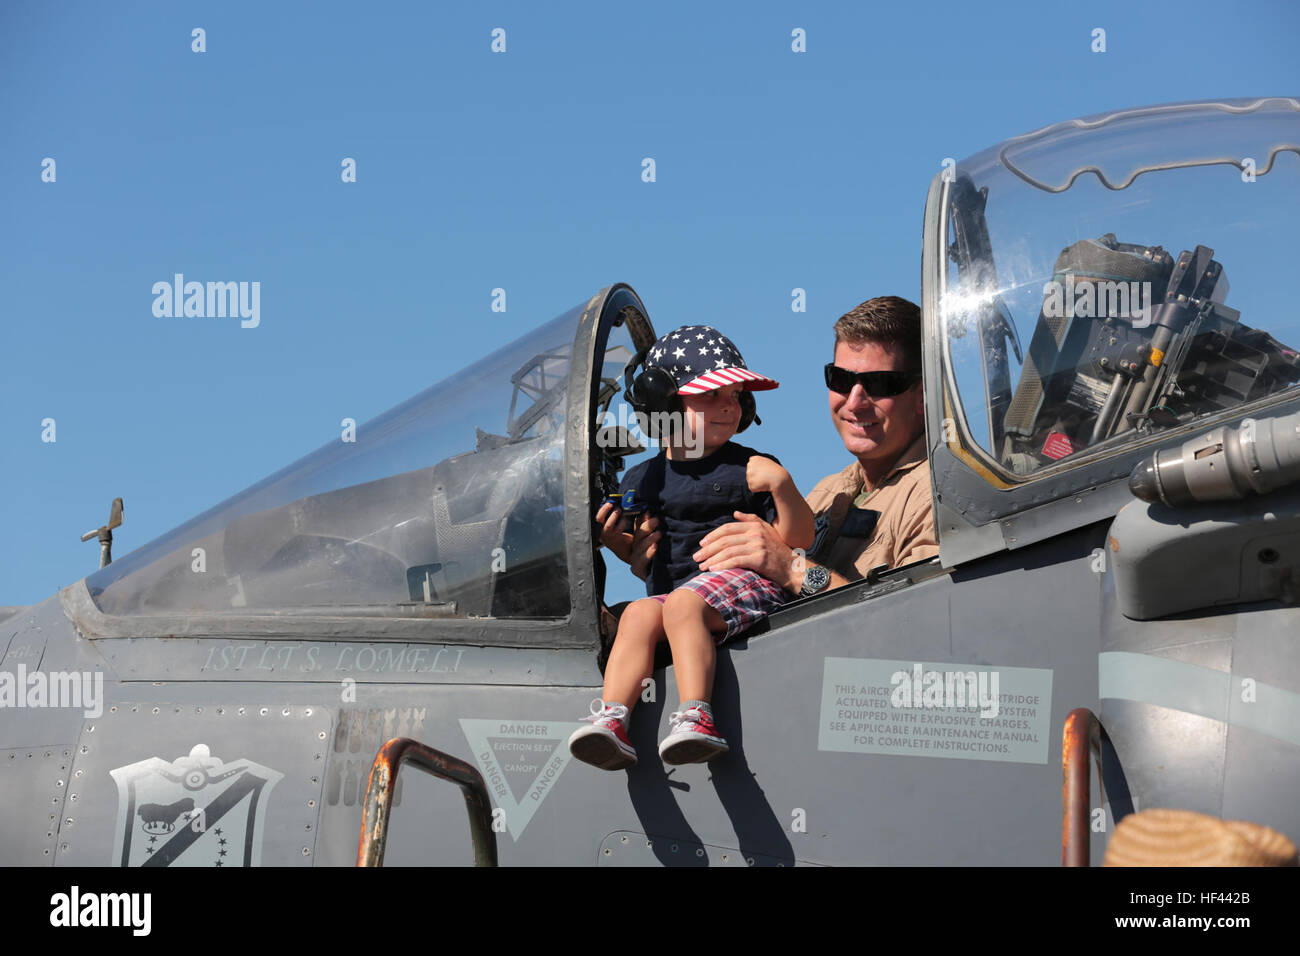 A U.S. Marine poses with a child in the cockpit of an AV-8B Harrier during the 2016 Marine Corps Air Station (MCAS) Miramar Air Show at MCAS Miramar, Calif., Sept. 24, 2016. The MCAS Miramar Air Show honors 100 years of the Marine Corps Reserves by showcasing aerial prowess of the Armed Forces and their appreciation of civilian community’s support to the troops. (U.S. Marine Corps photo by Pfc. Nadia J. Stark/Not Released) 2016 MCAS Miramar Air Show 160924-M-BV291-251 Stock Photo